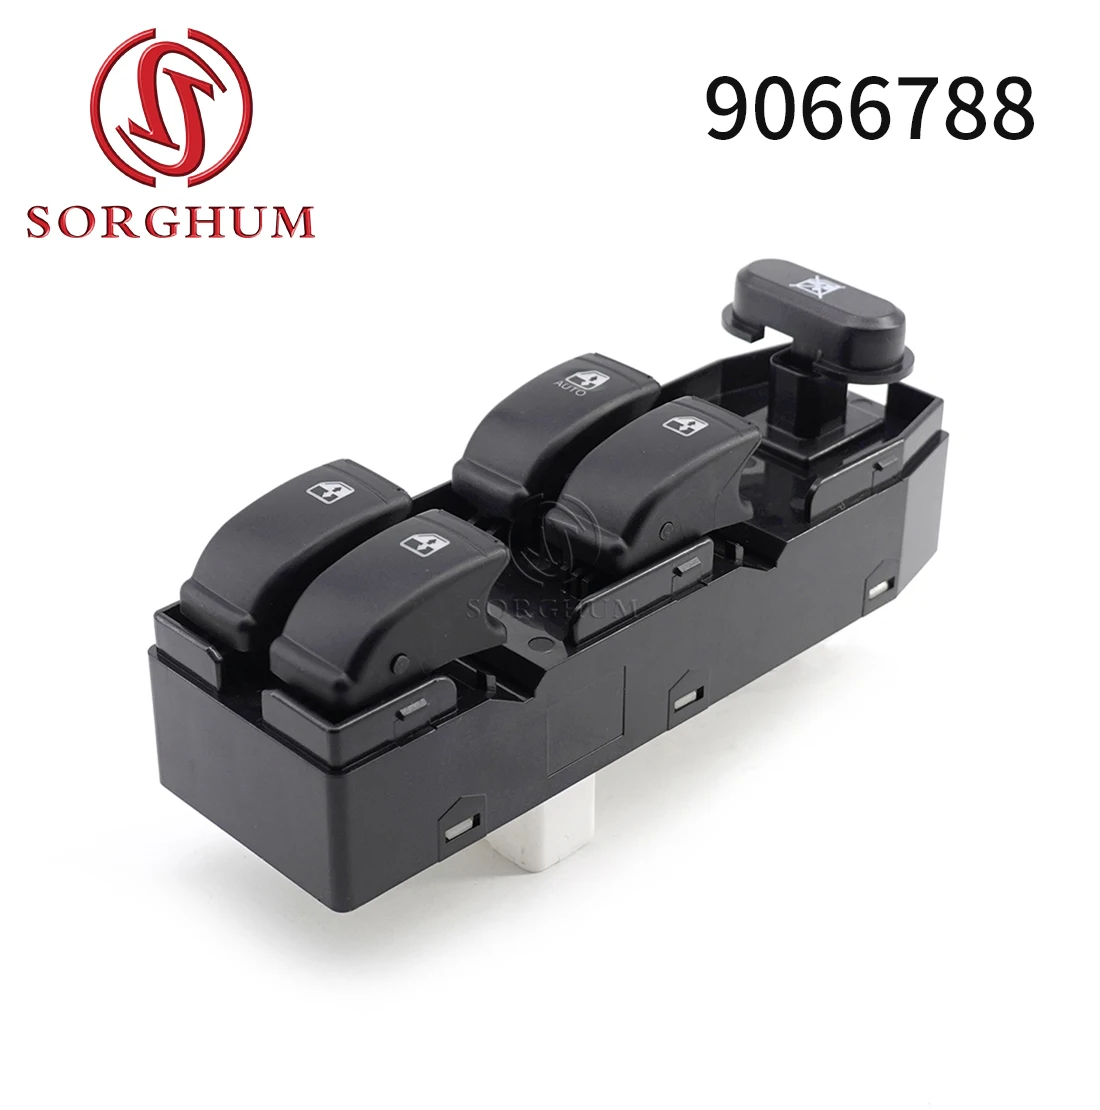 

SORGHUM 9066788 For Buick Chevrolet Optra Daewoo Lacetti 2008-2015 Master Power Window Switch Auto Window Lifter Control Button